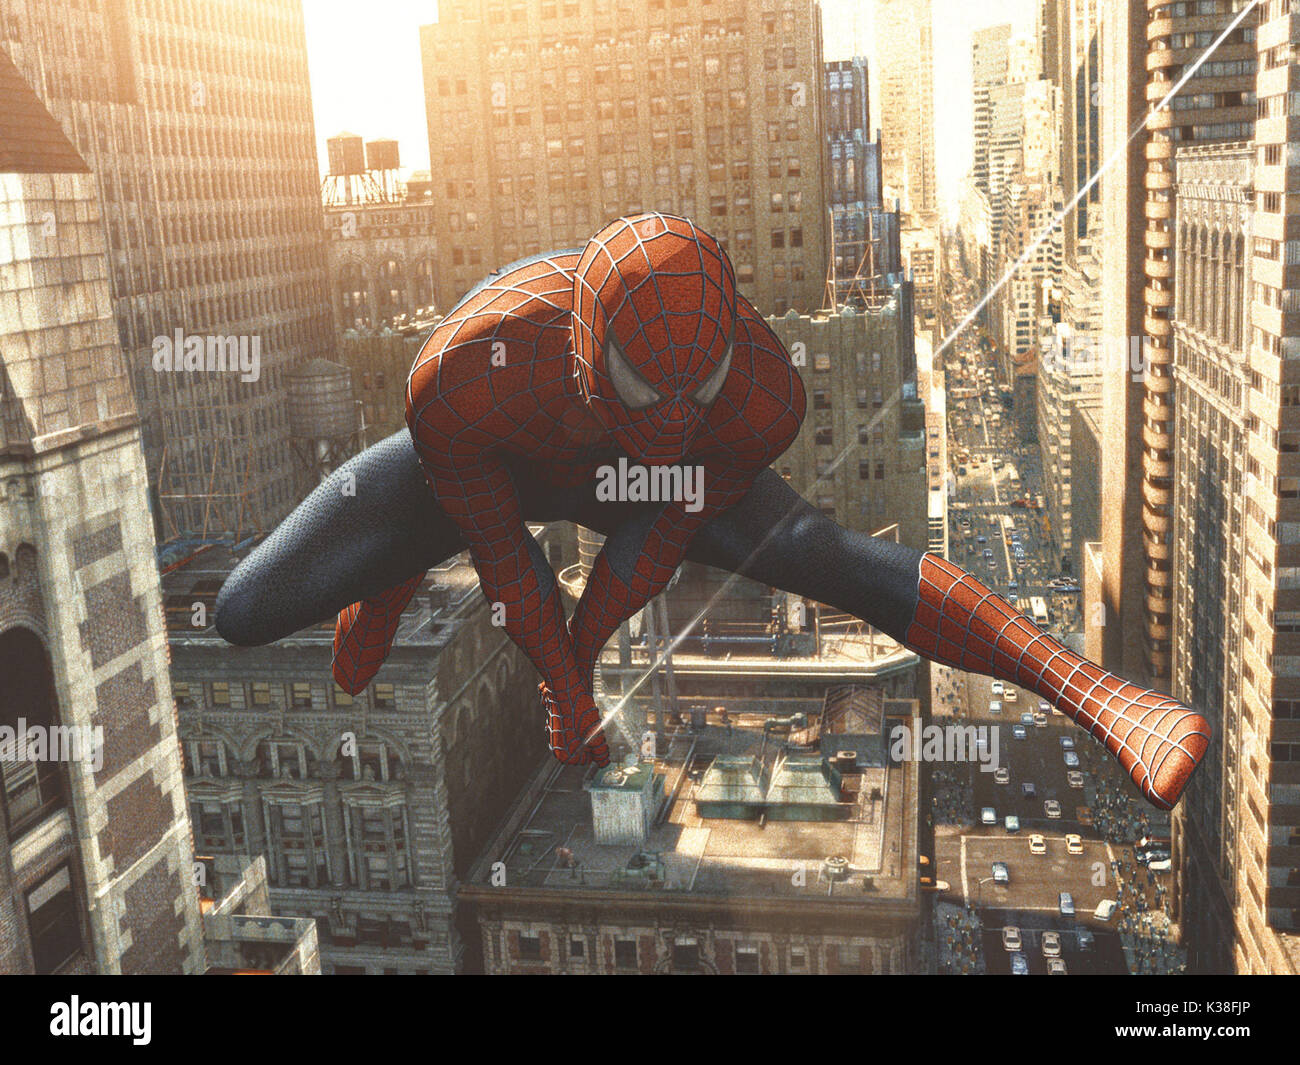 SPIDER-MAN 2 TOBEY MAGUIRE SUBJECT: COMIC BOOK SUPER HEROES LOCATION: NEW  YORK CITY Stock Photo - Alamy